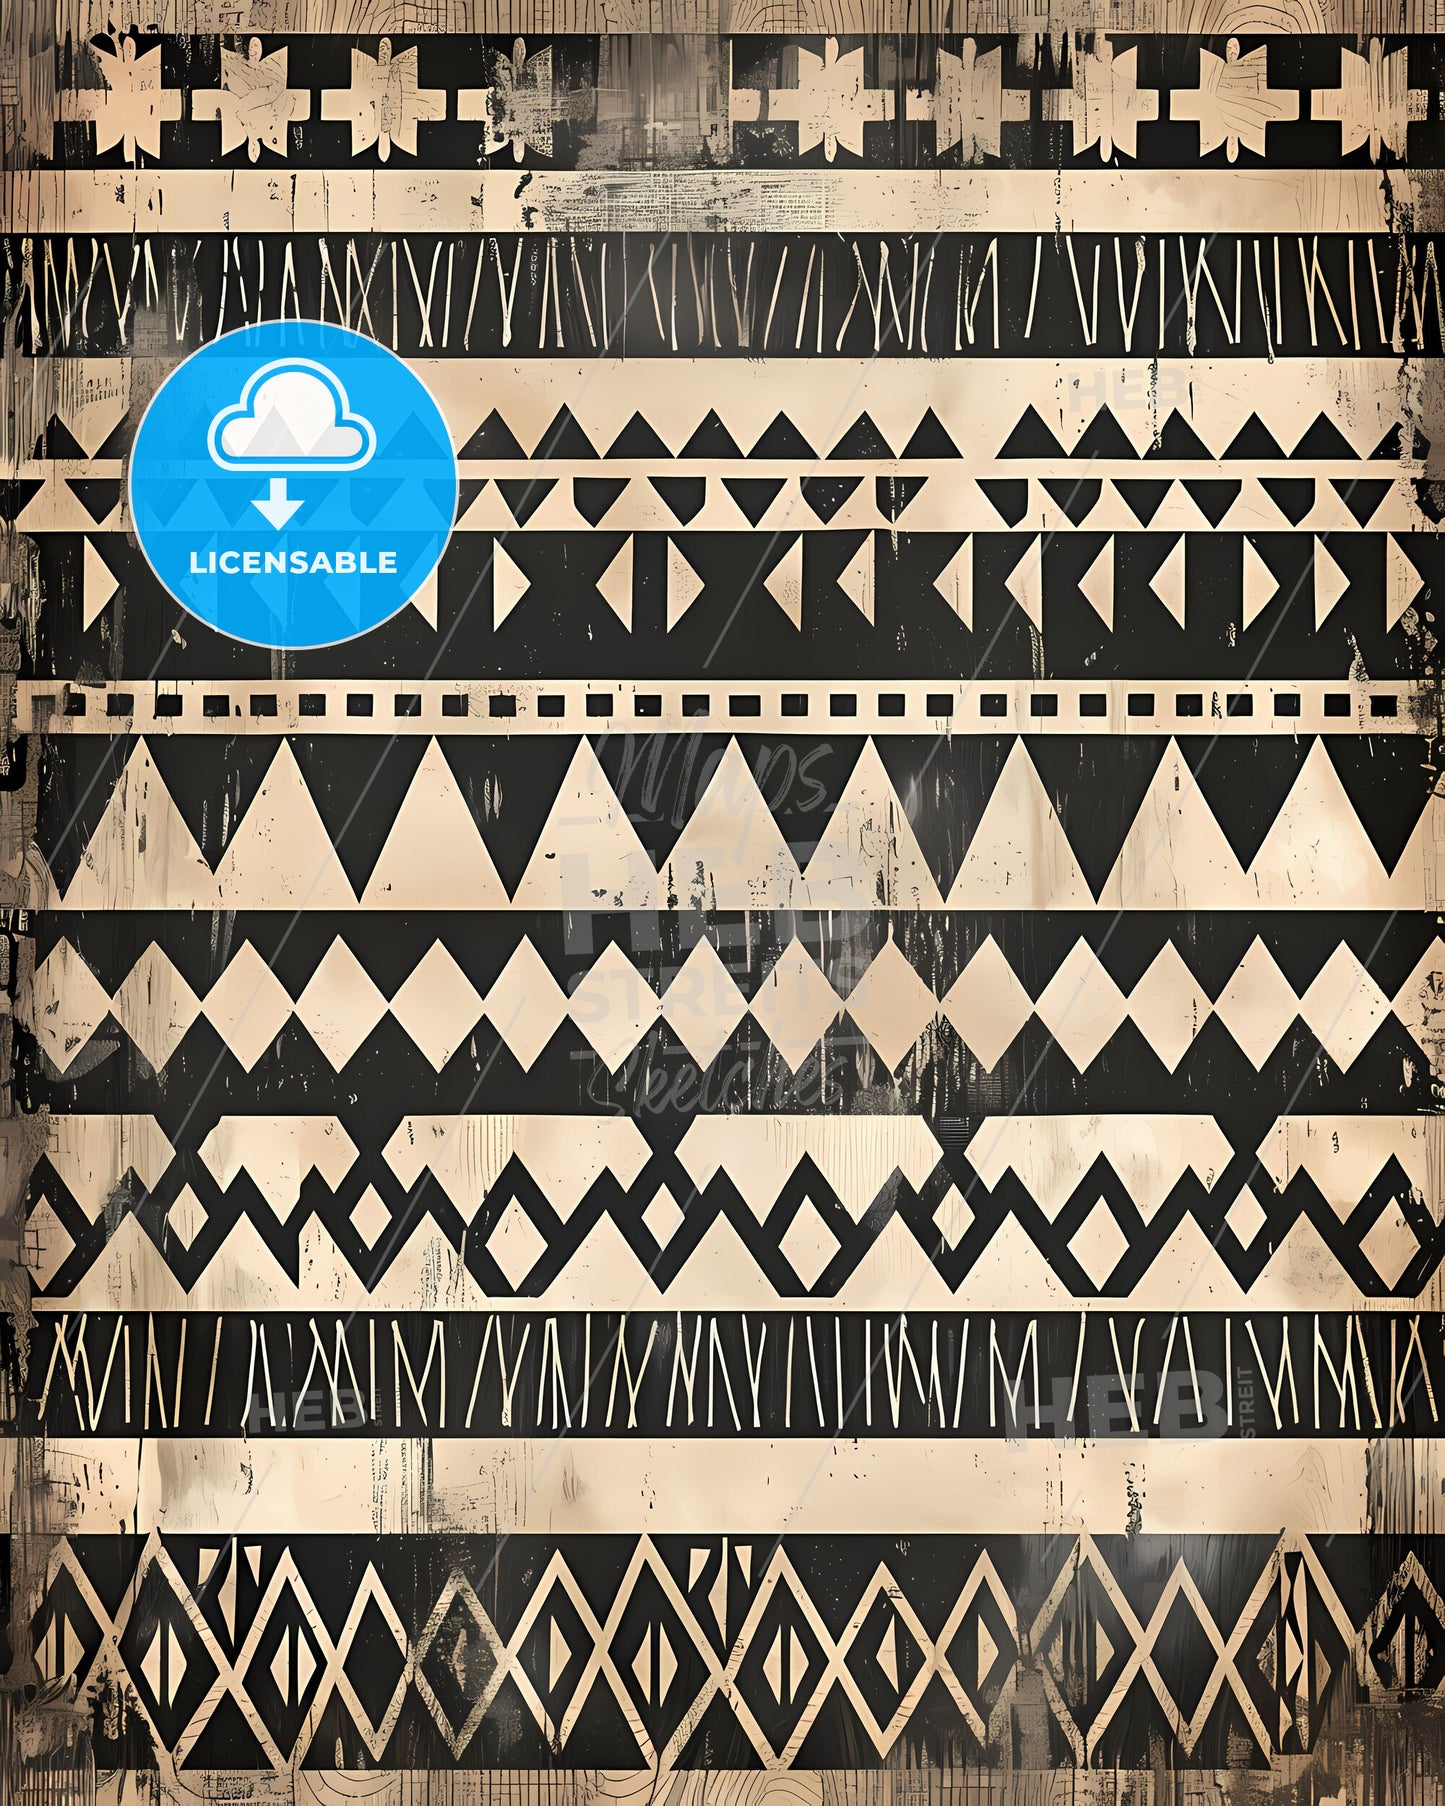 Abstract black and white boho style minimalist pattern on a tan surface with a focus on the art aspect